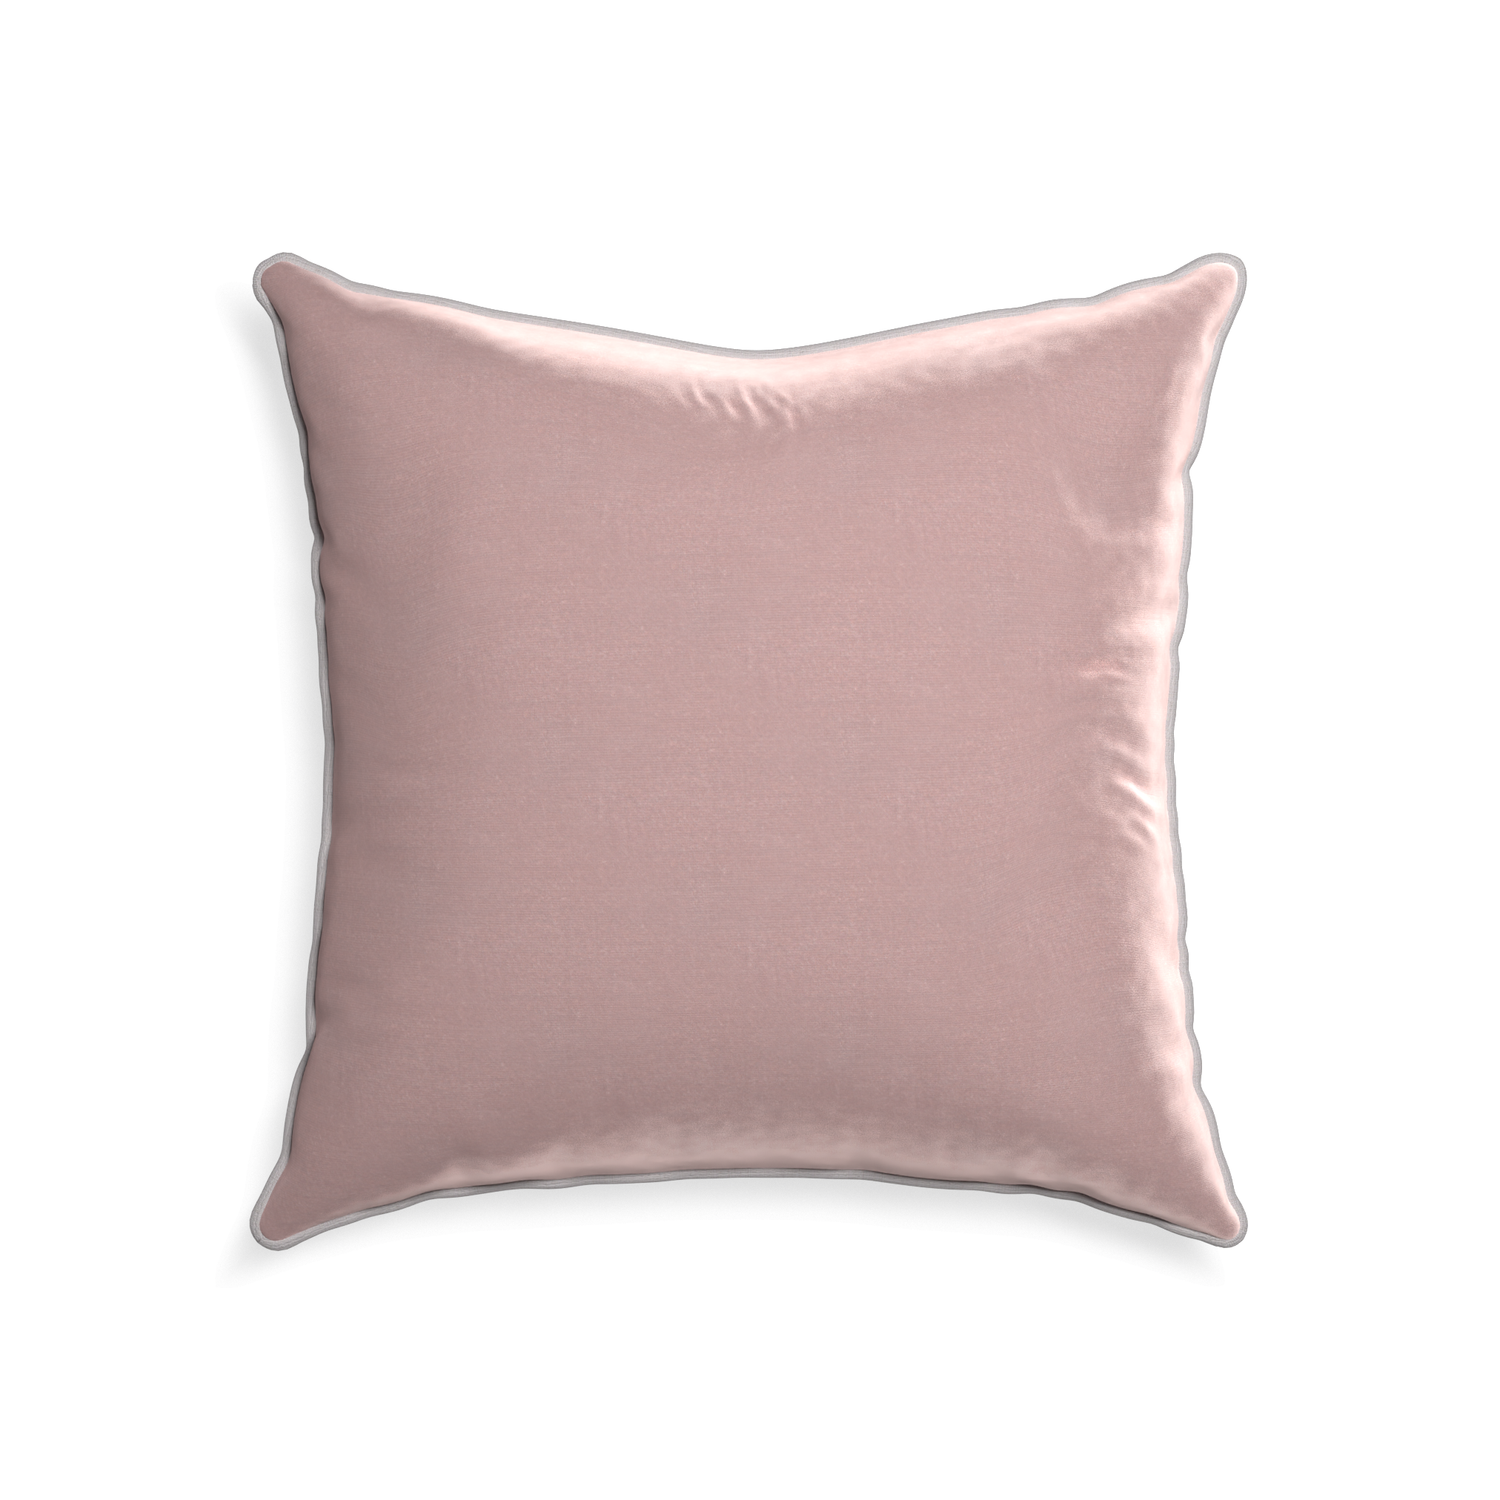 22-square mauve velvet custom pillow with pebble piping on white background